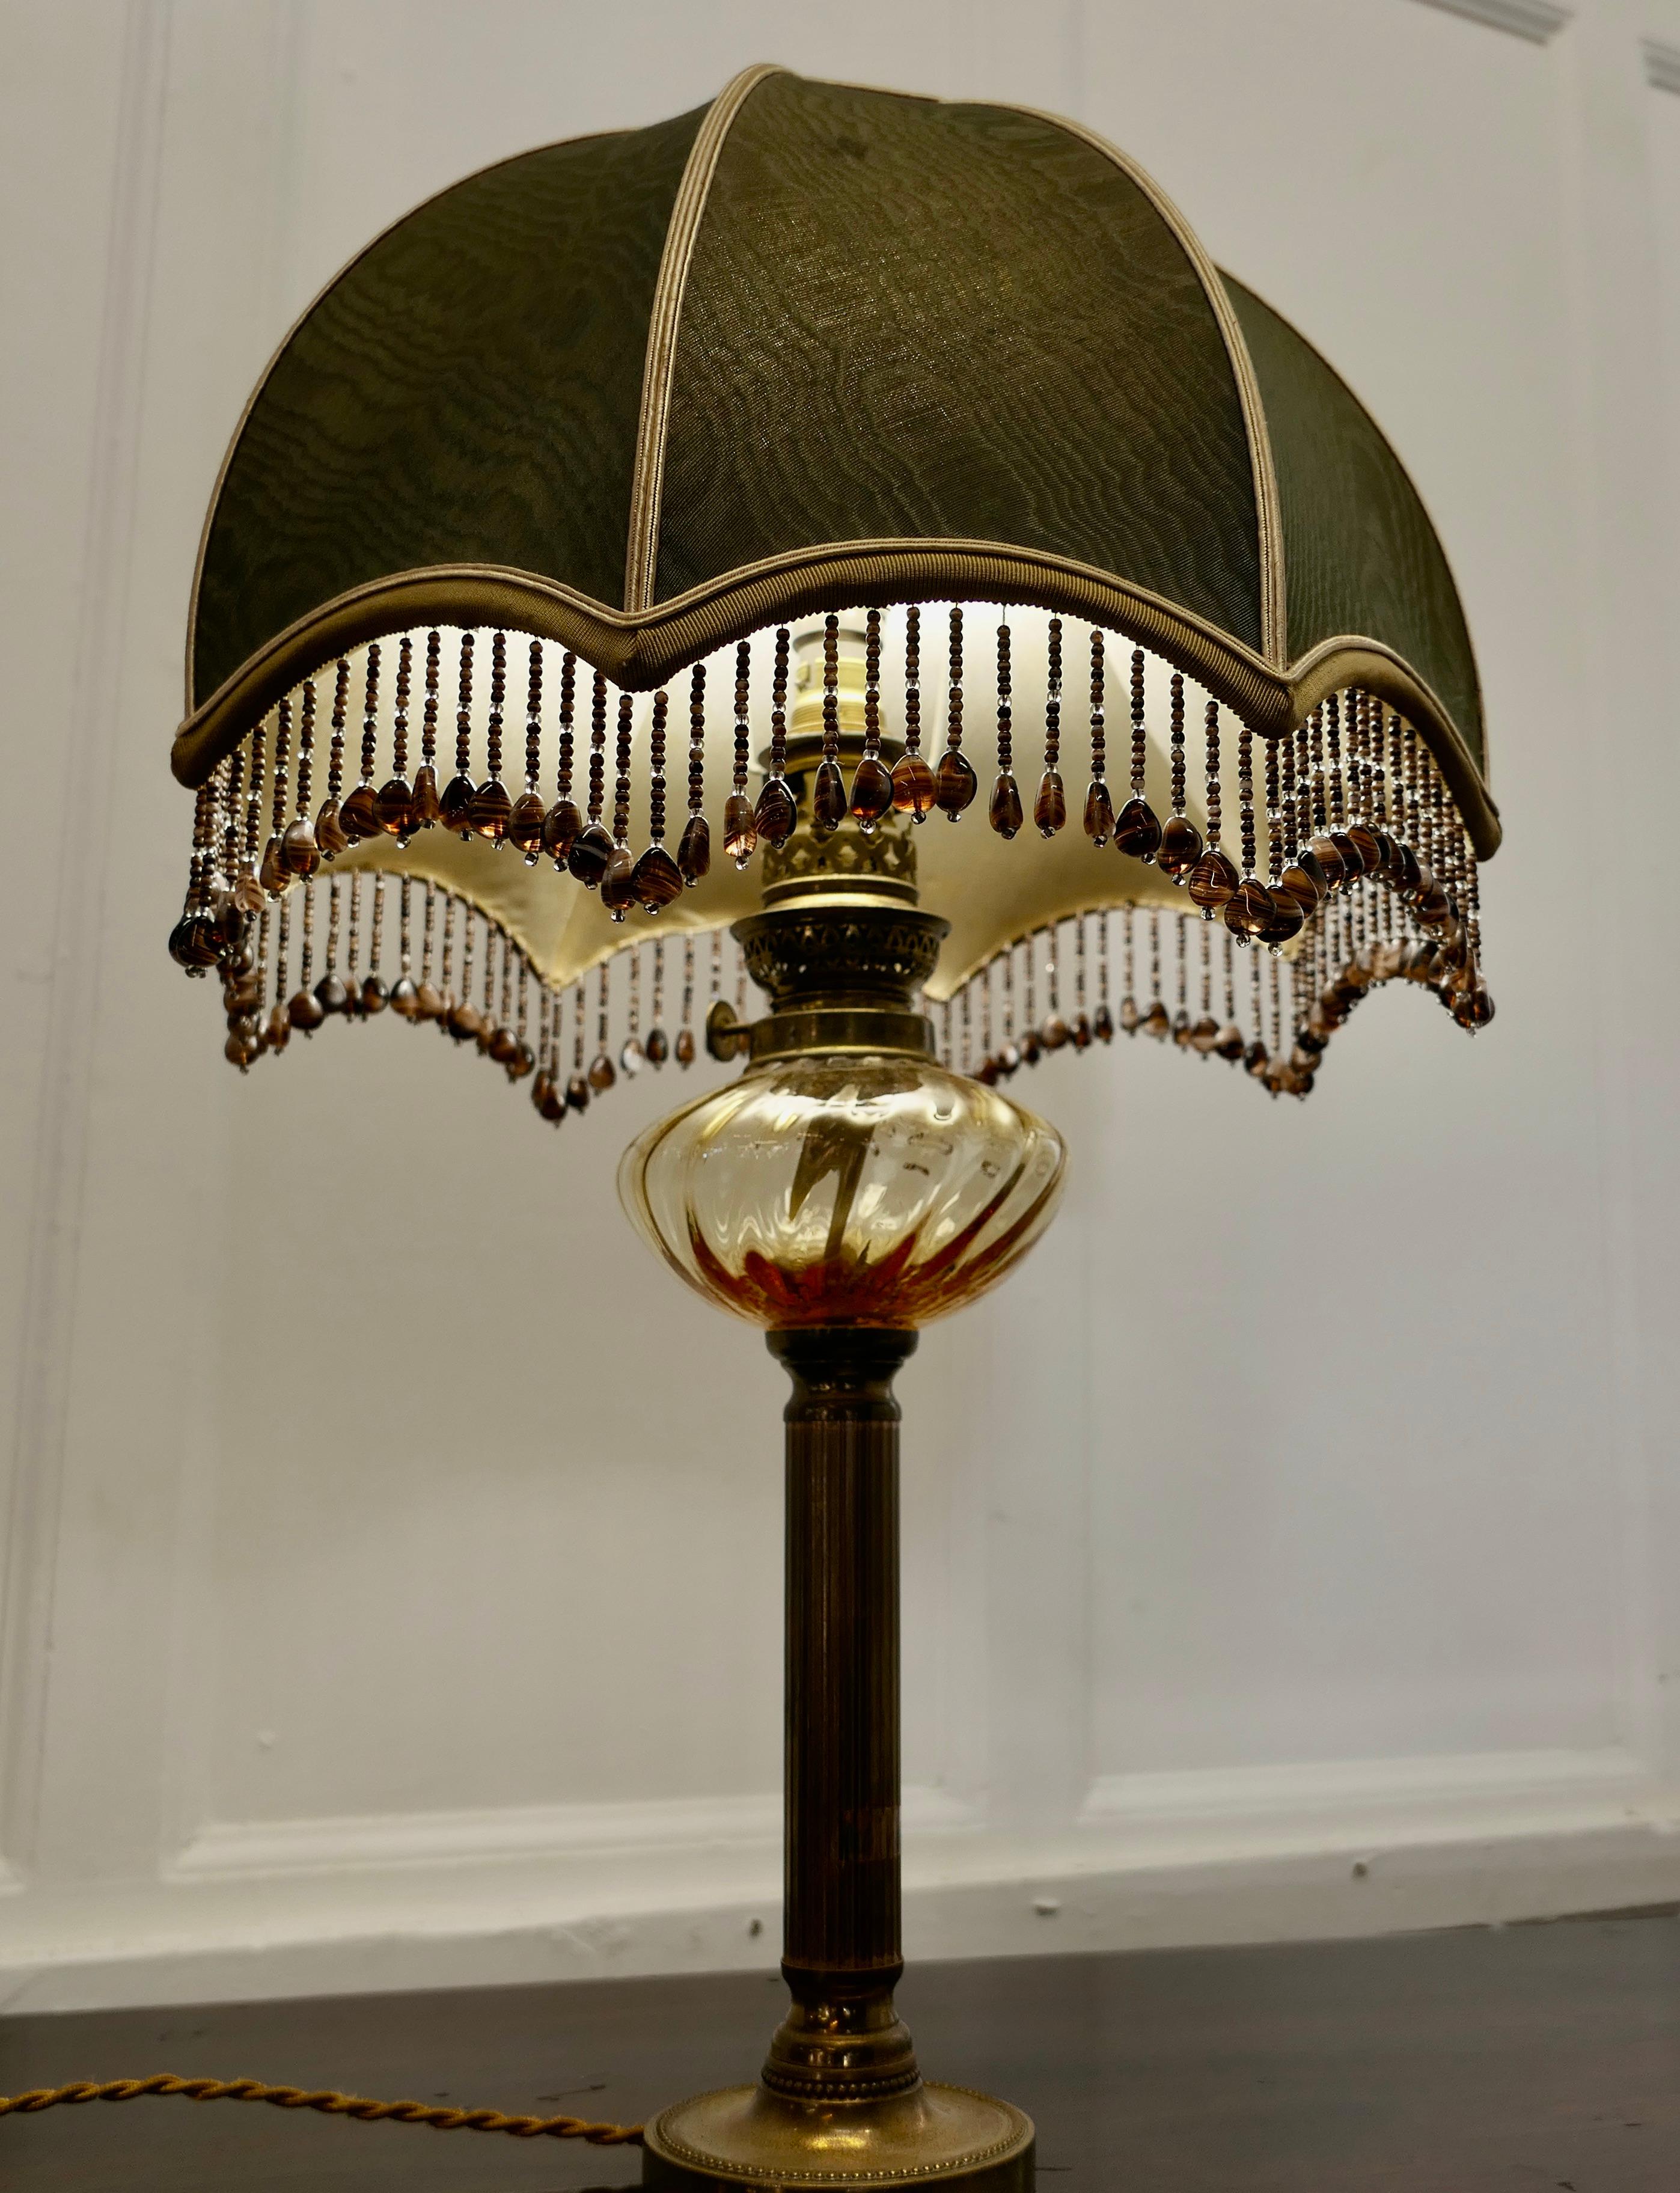 French table lamp with beaded dome lampshade

The lamp has been converted from a pretty Amber Glass and Brass Oil Lamp it is topped of with a superb Dark Green Beaded Dome lampshade 
The lamp and shade are in good used condition, the wiring is